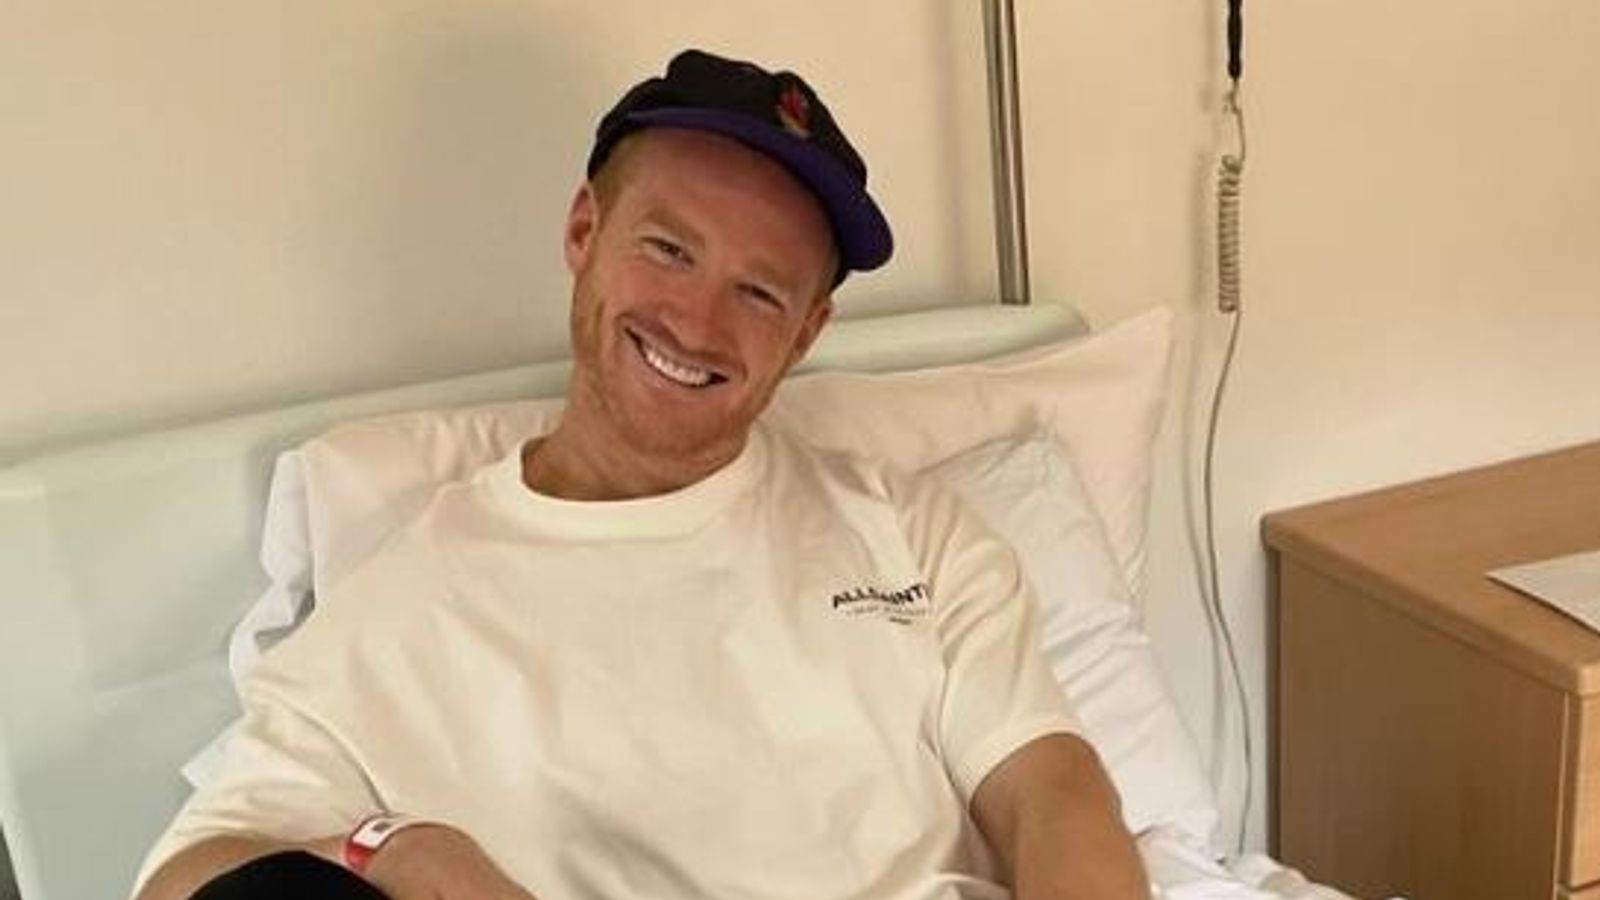 Greg Rutherford gives update on 'horribly painful' skating injury after missing Dancing On Ice final